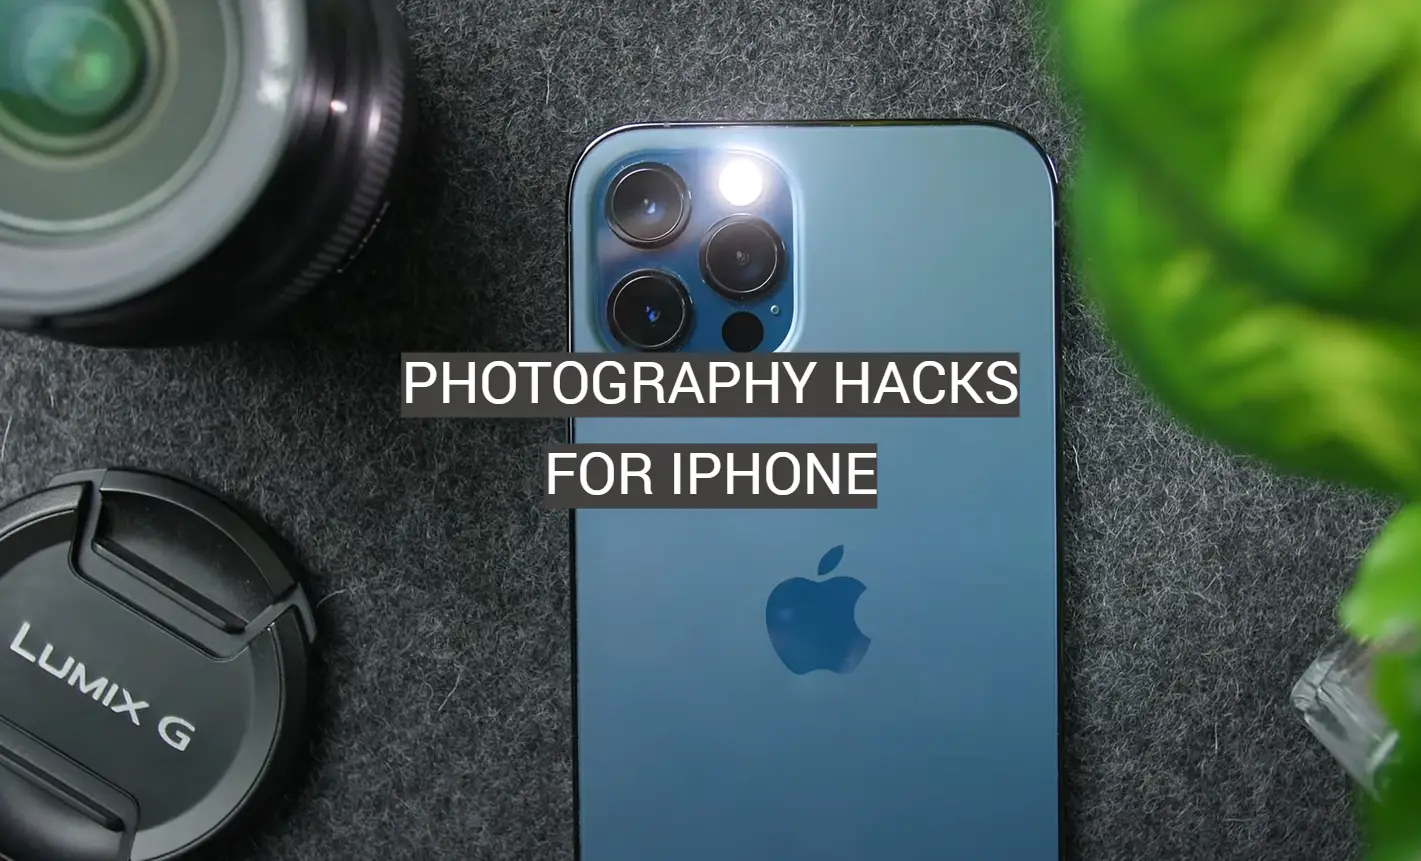 Photography Hacks for iPhone